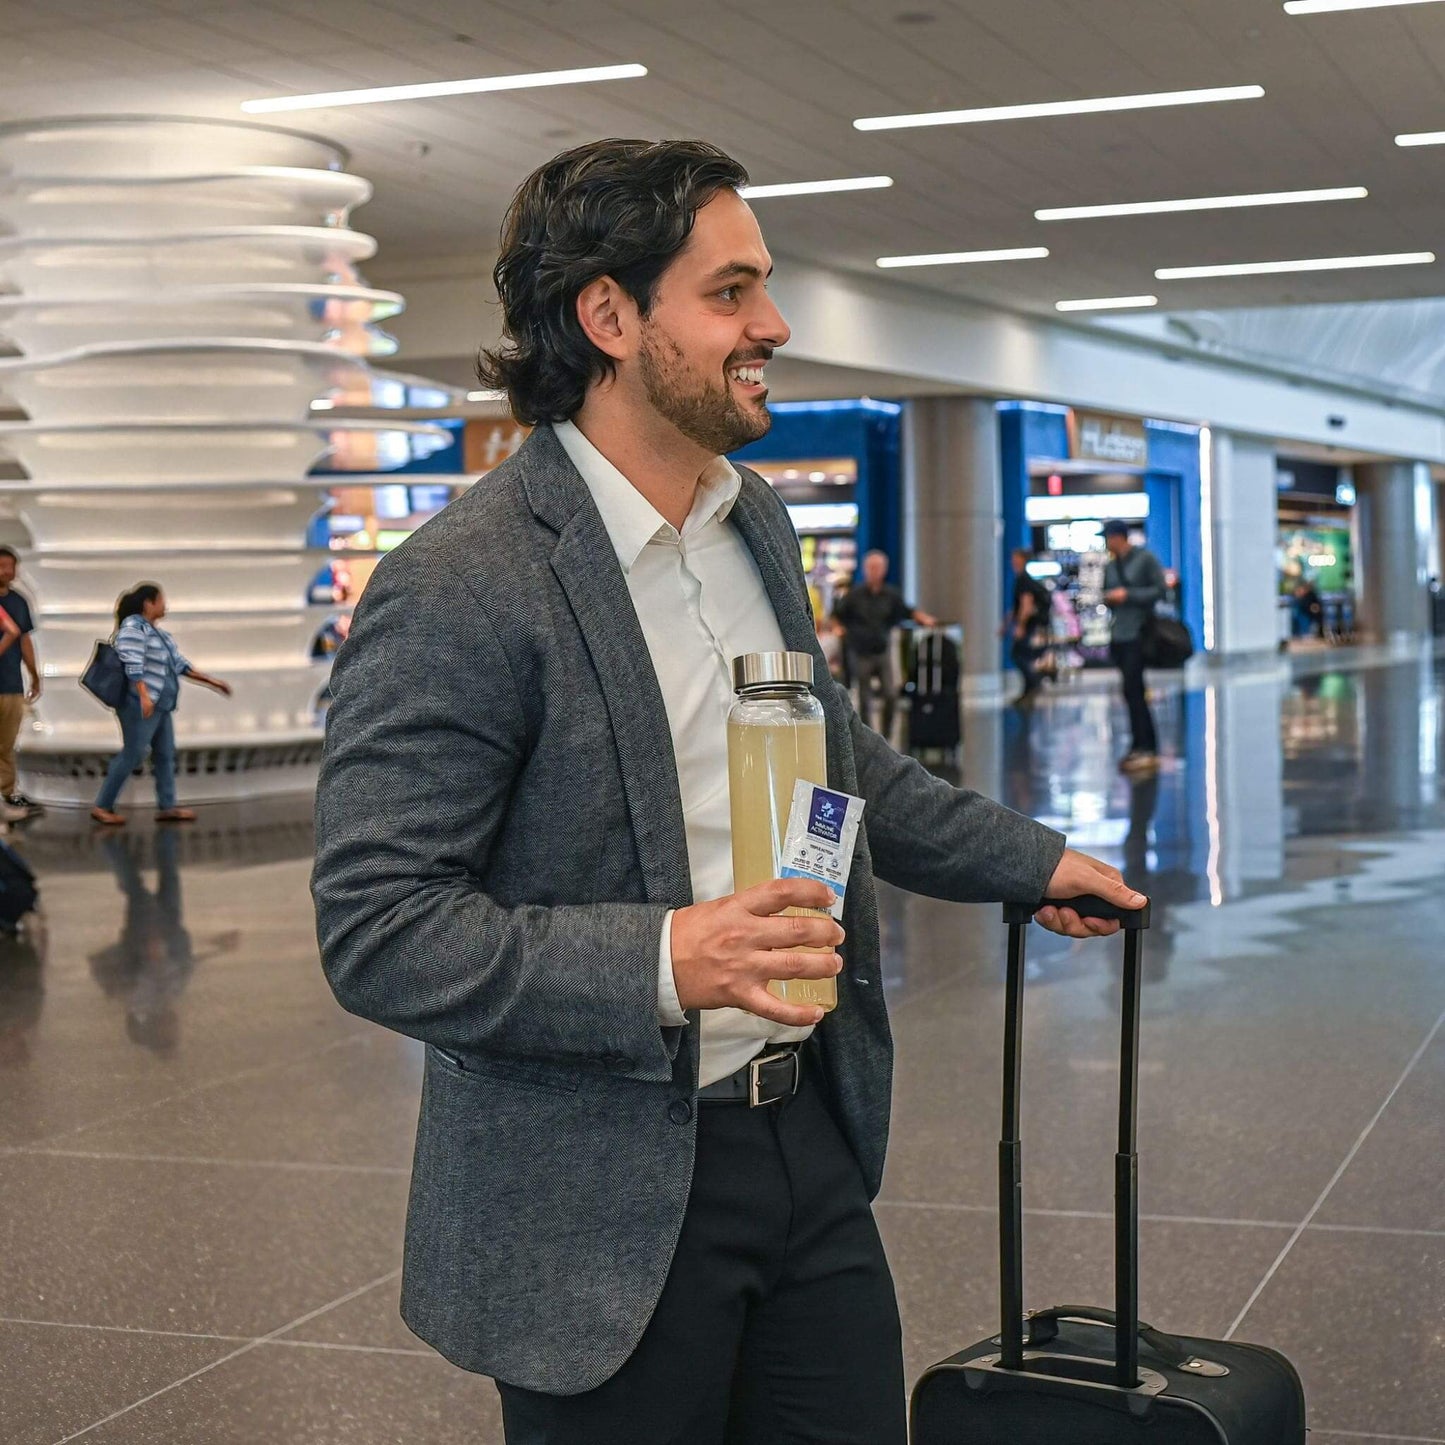 man in suit jacket in airport walking with luggage and holding water bottle with well traveled and packet